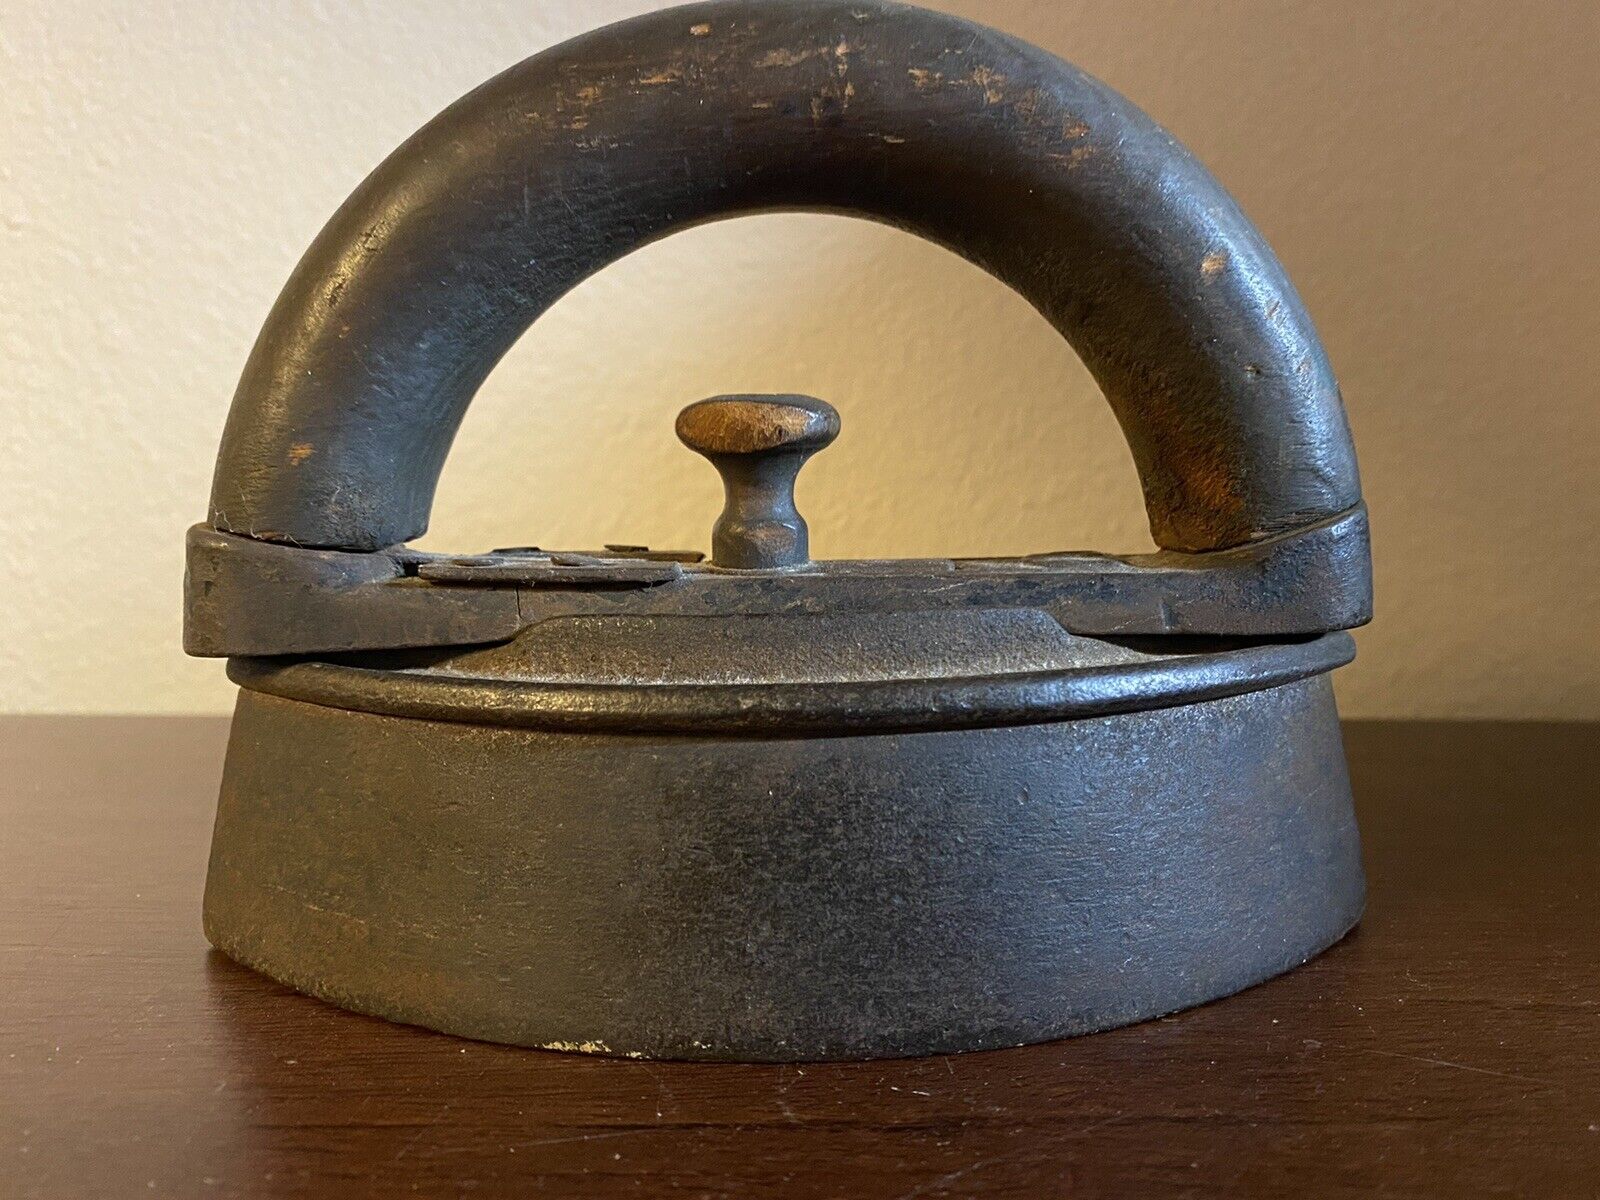 Antique Valuations: Antique Vintage Small Sad Iron - Kitchen Tool - with detachable Wood Handle